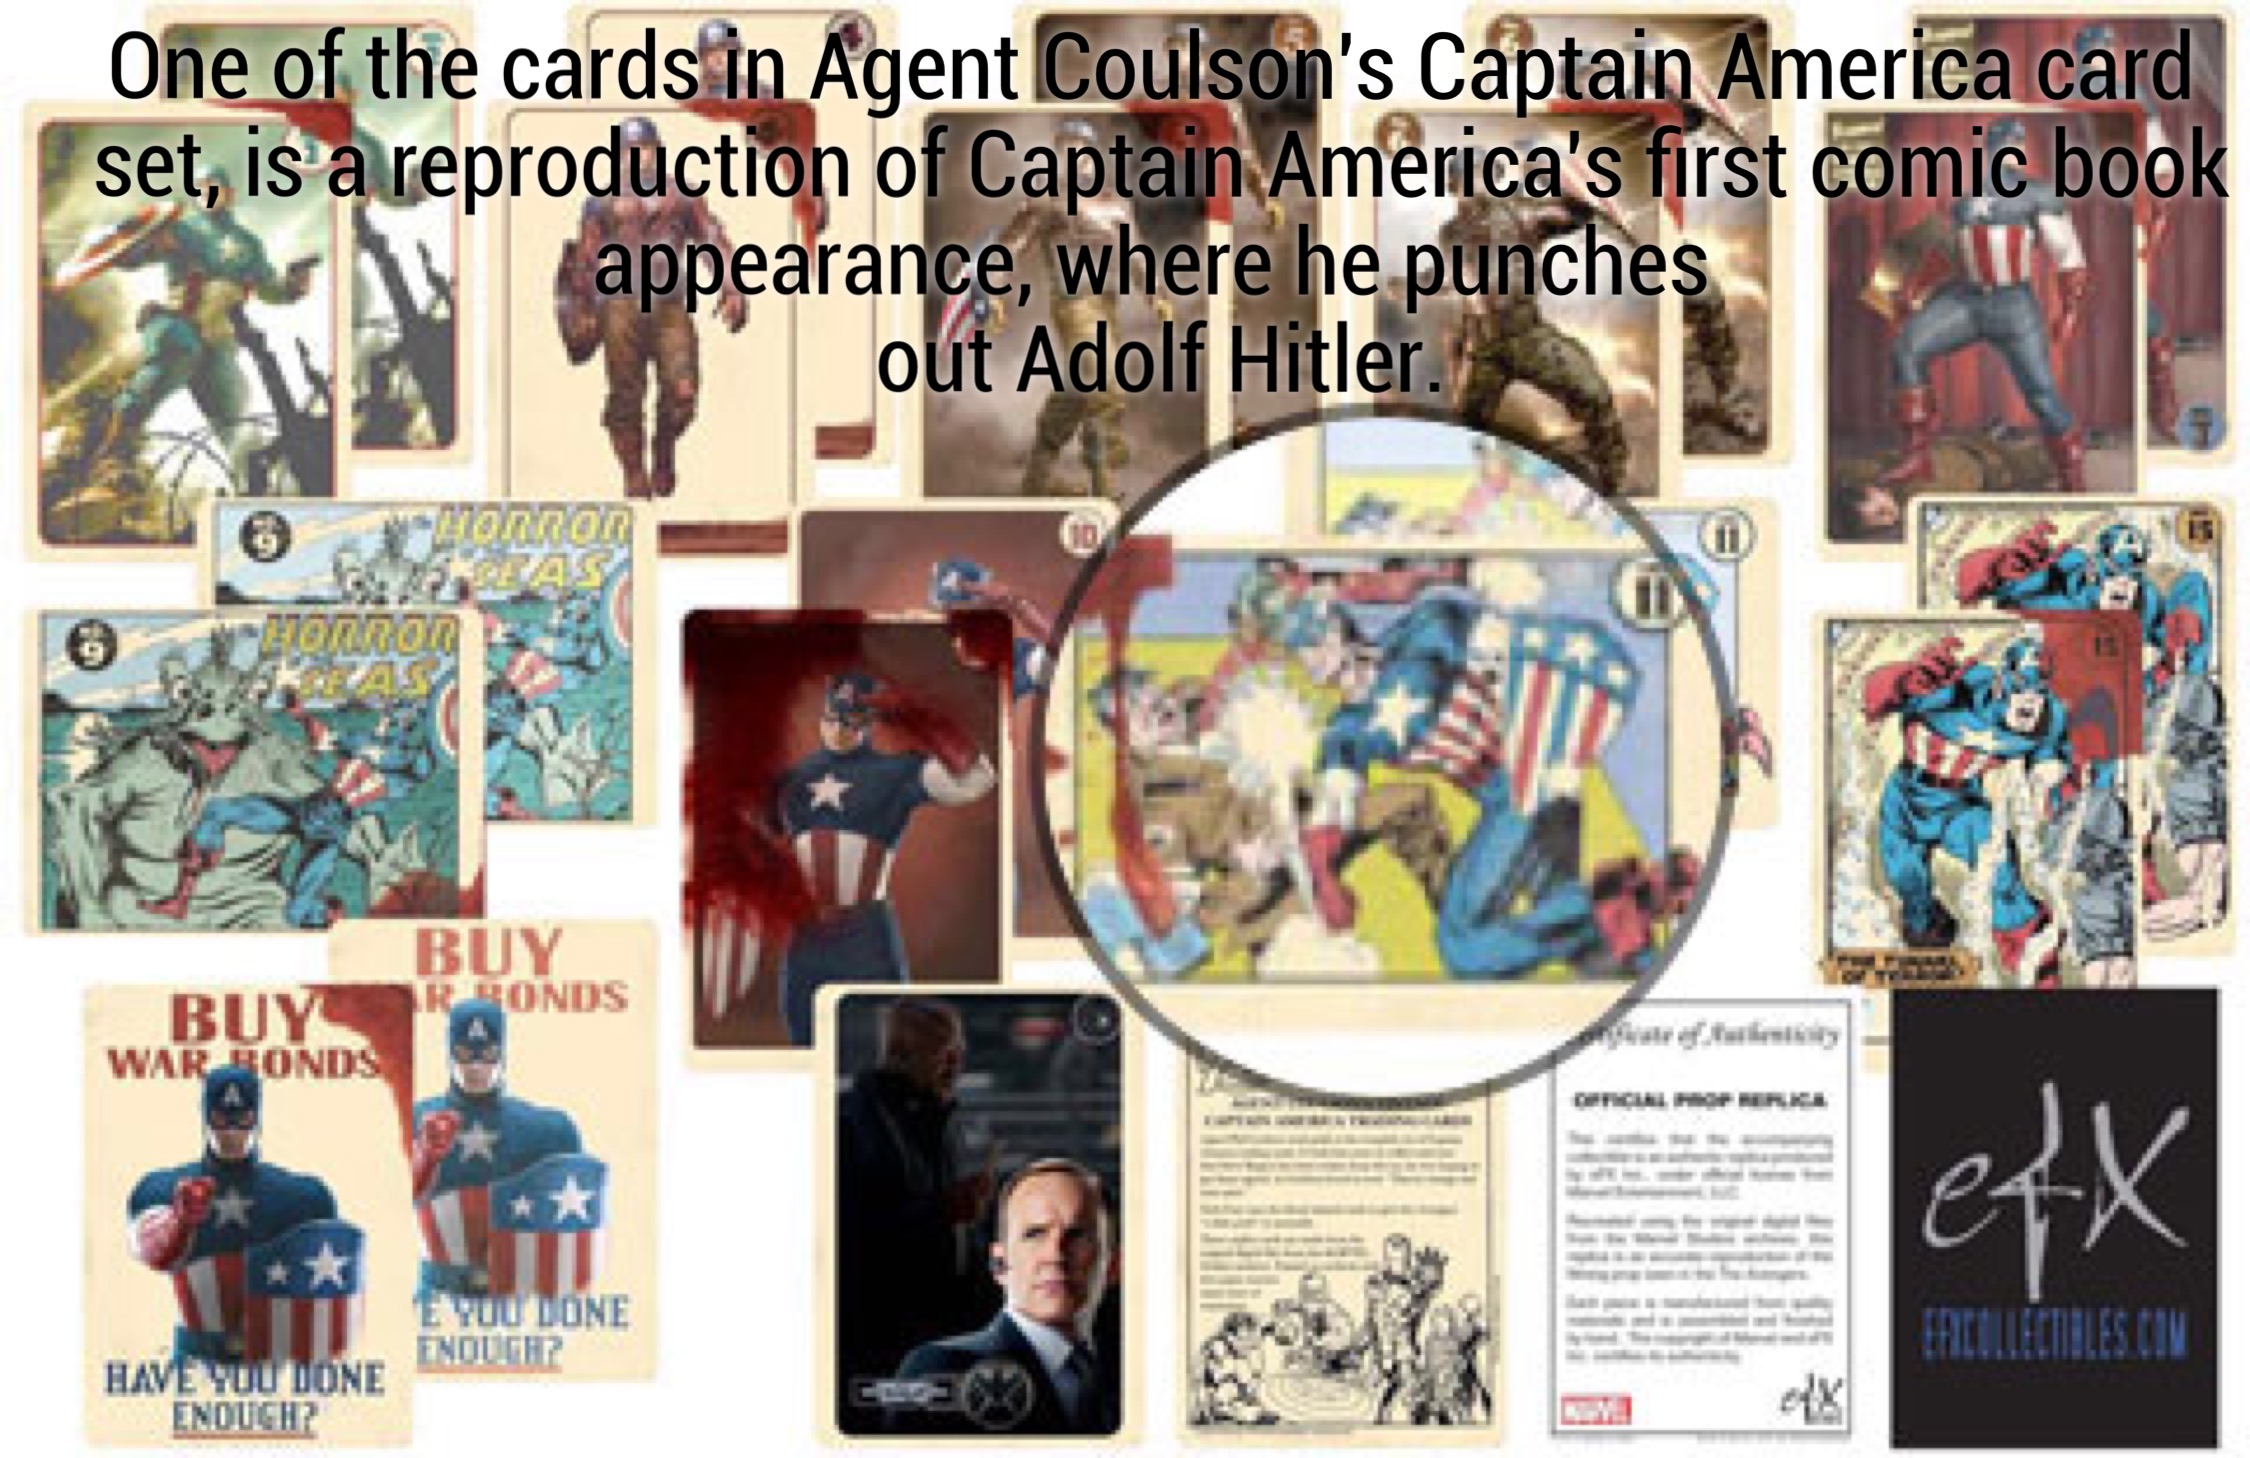 agent coulson's vintage captain america trading card set - One of the cards in Agent Coulson's Captain America card set, is a reproduction of Captain America's first comic book appearance, where he punches out Adolf Hitler. annon 25 Homzo Buy D Rones Buy 